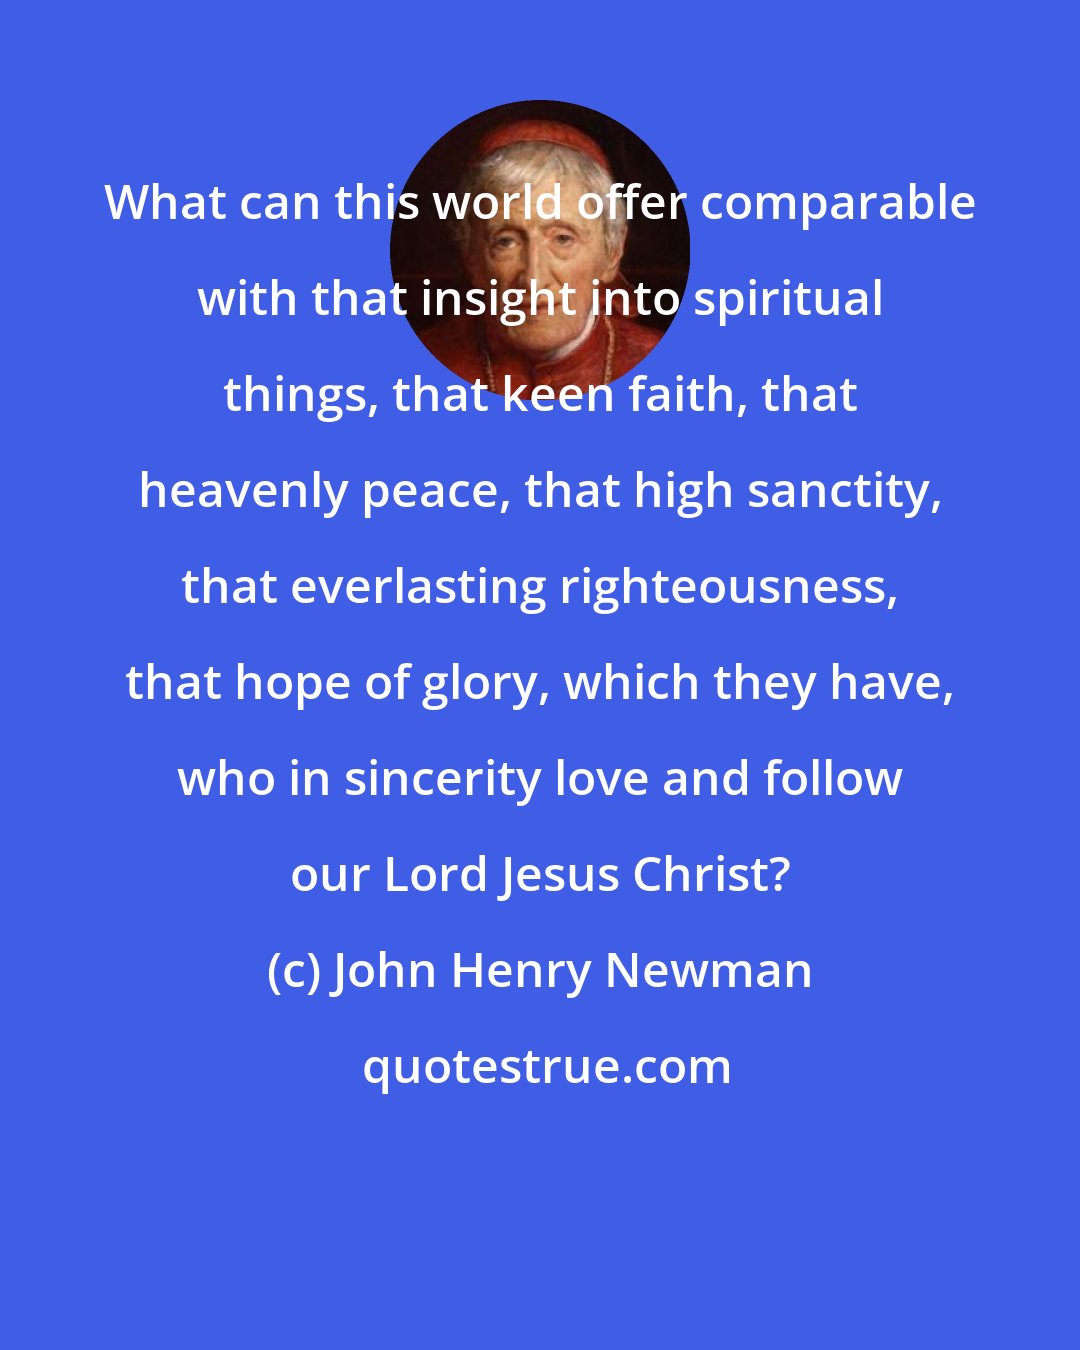 John Henry Newman: What can this world offer comparable with that insight into spiritual things, that keen faith, that heavenly peace, that high sanctity, that everlasting righteousness, that hope of glory, which they have, who in sincerity love and follow our Lord Jesus Christ?